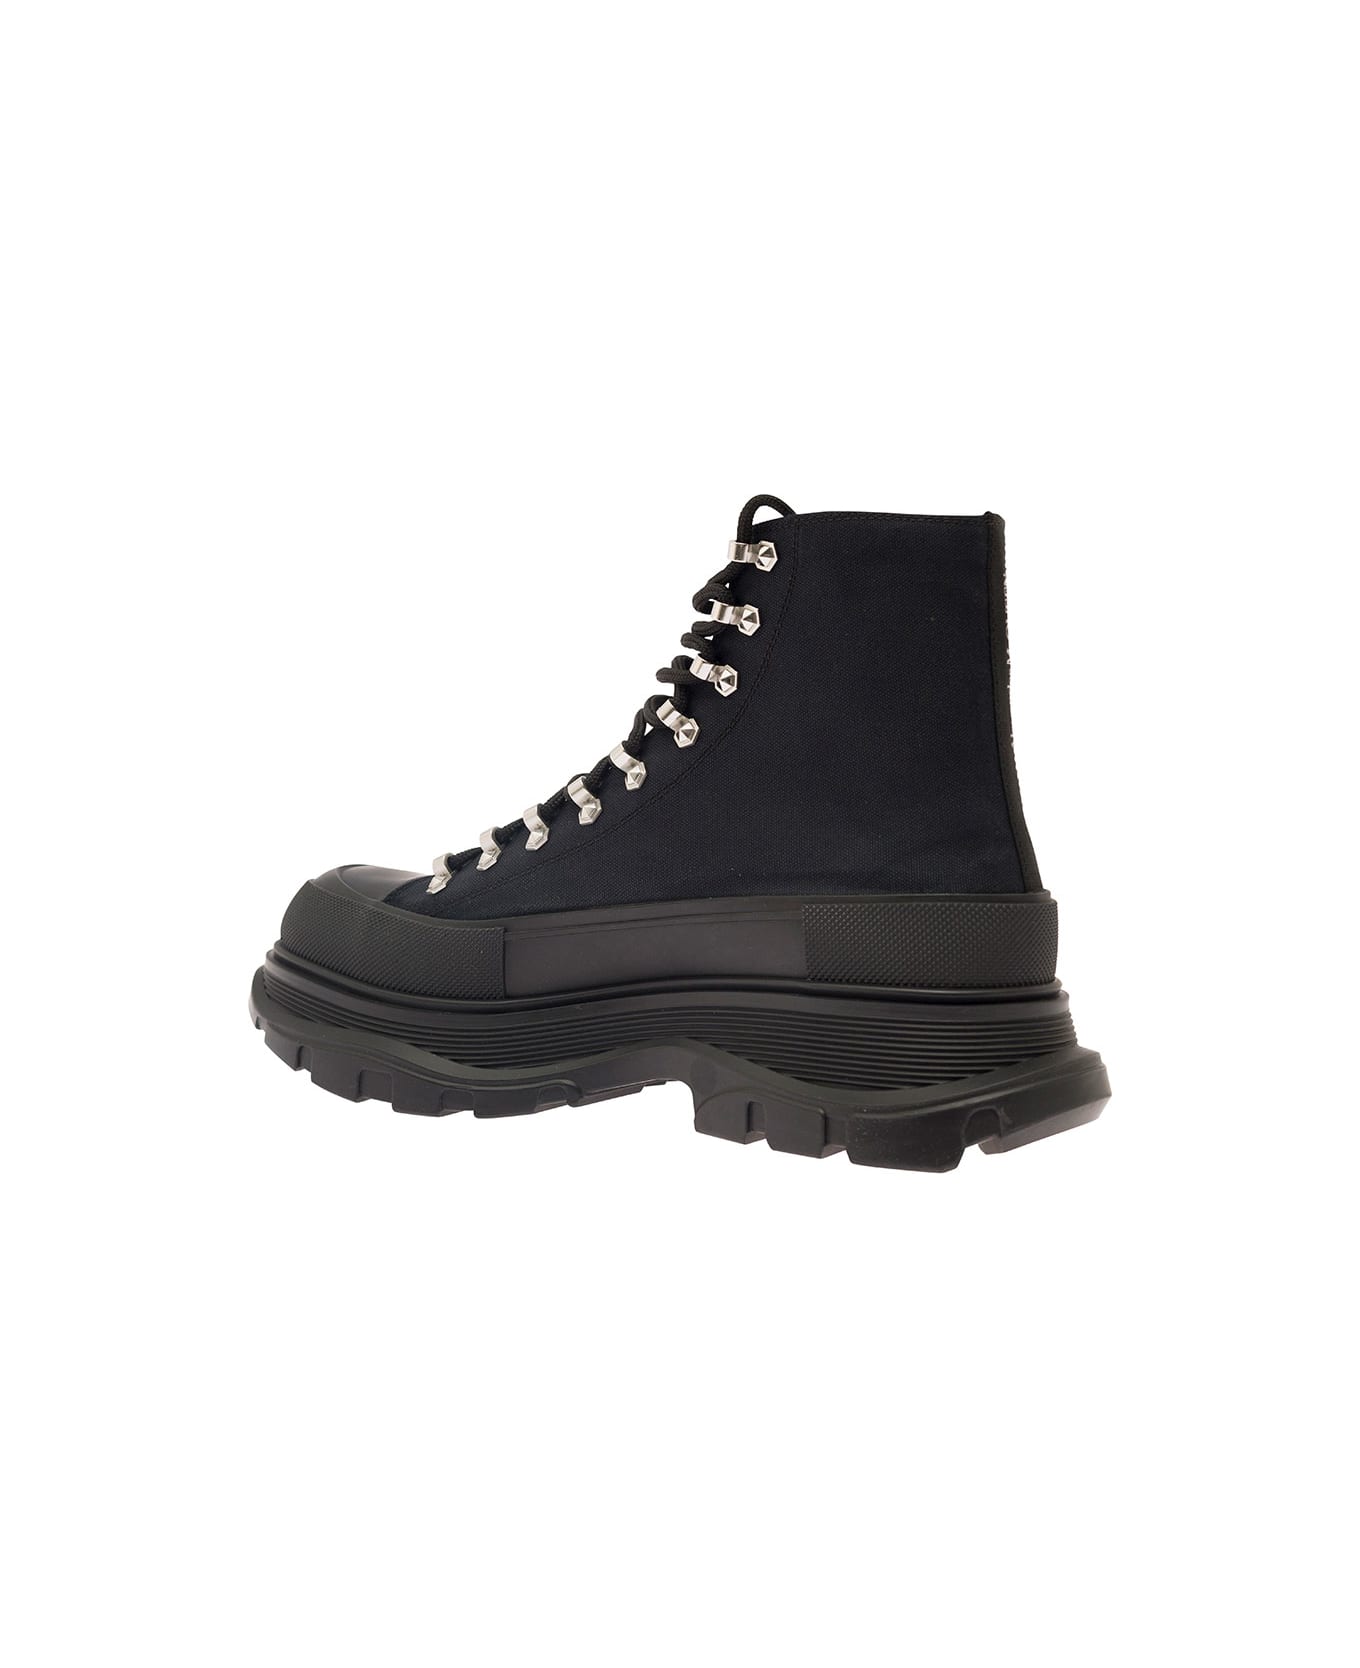 Alexander McQueen 'trade Slick' Black Lace-up Boots With Thread Sole In Canvas Man - Black ブーツ